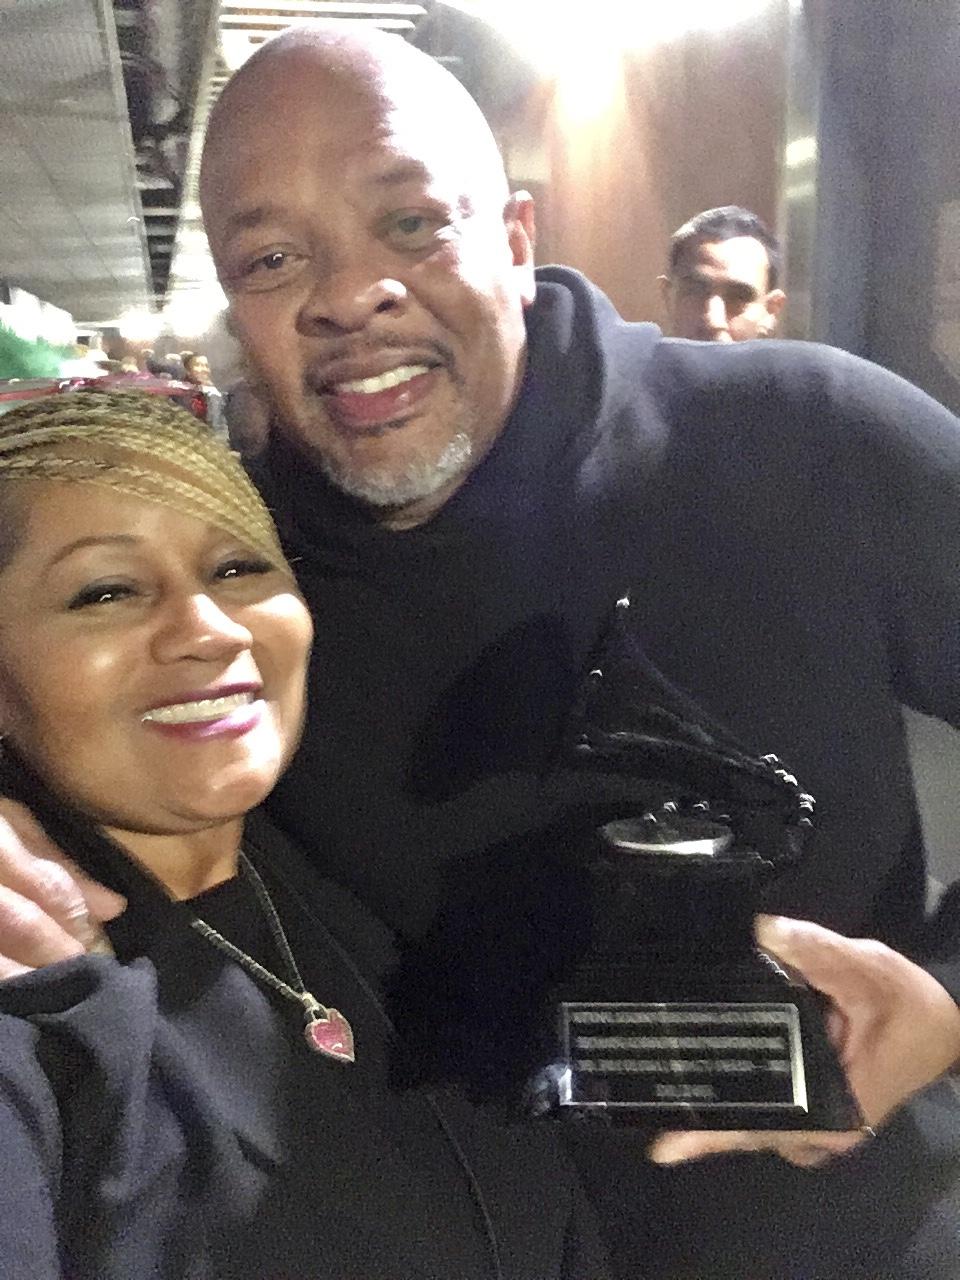 Carr poses for a selfie with Dr. Dre at the GRAMMYs on Feb. 5. Dr. Dre was honored at the GRAMMYs and received the Dr. Dre Global Impact Award, which he is holding in the selfie.